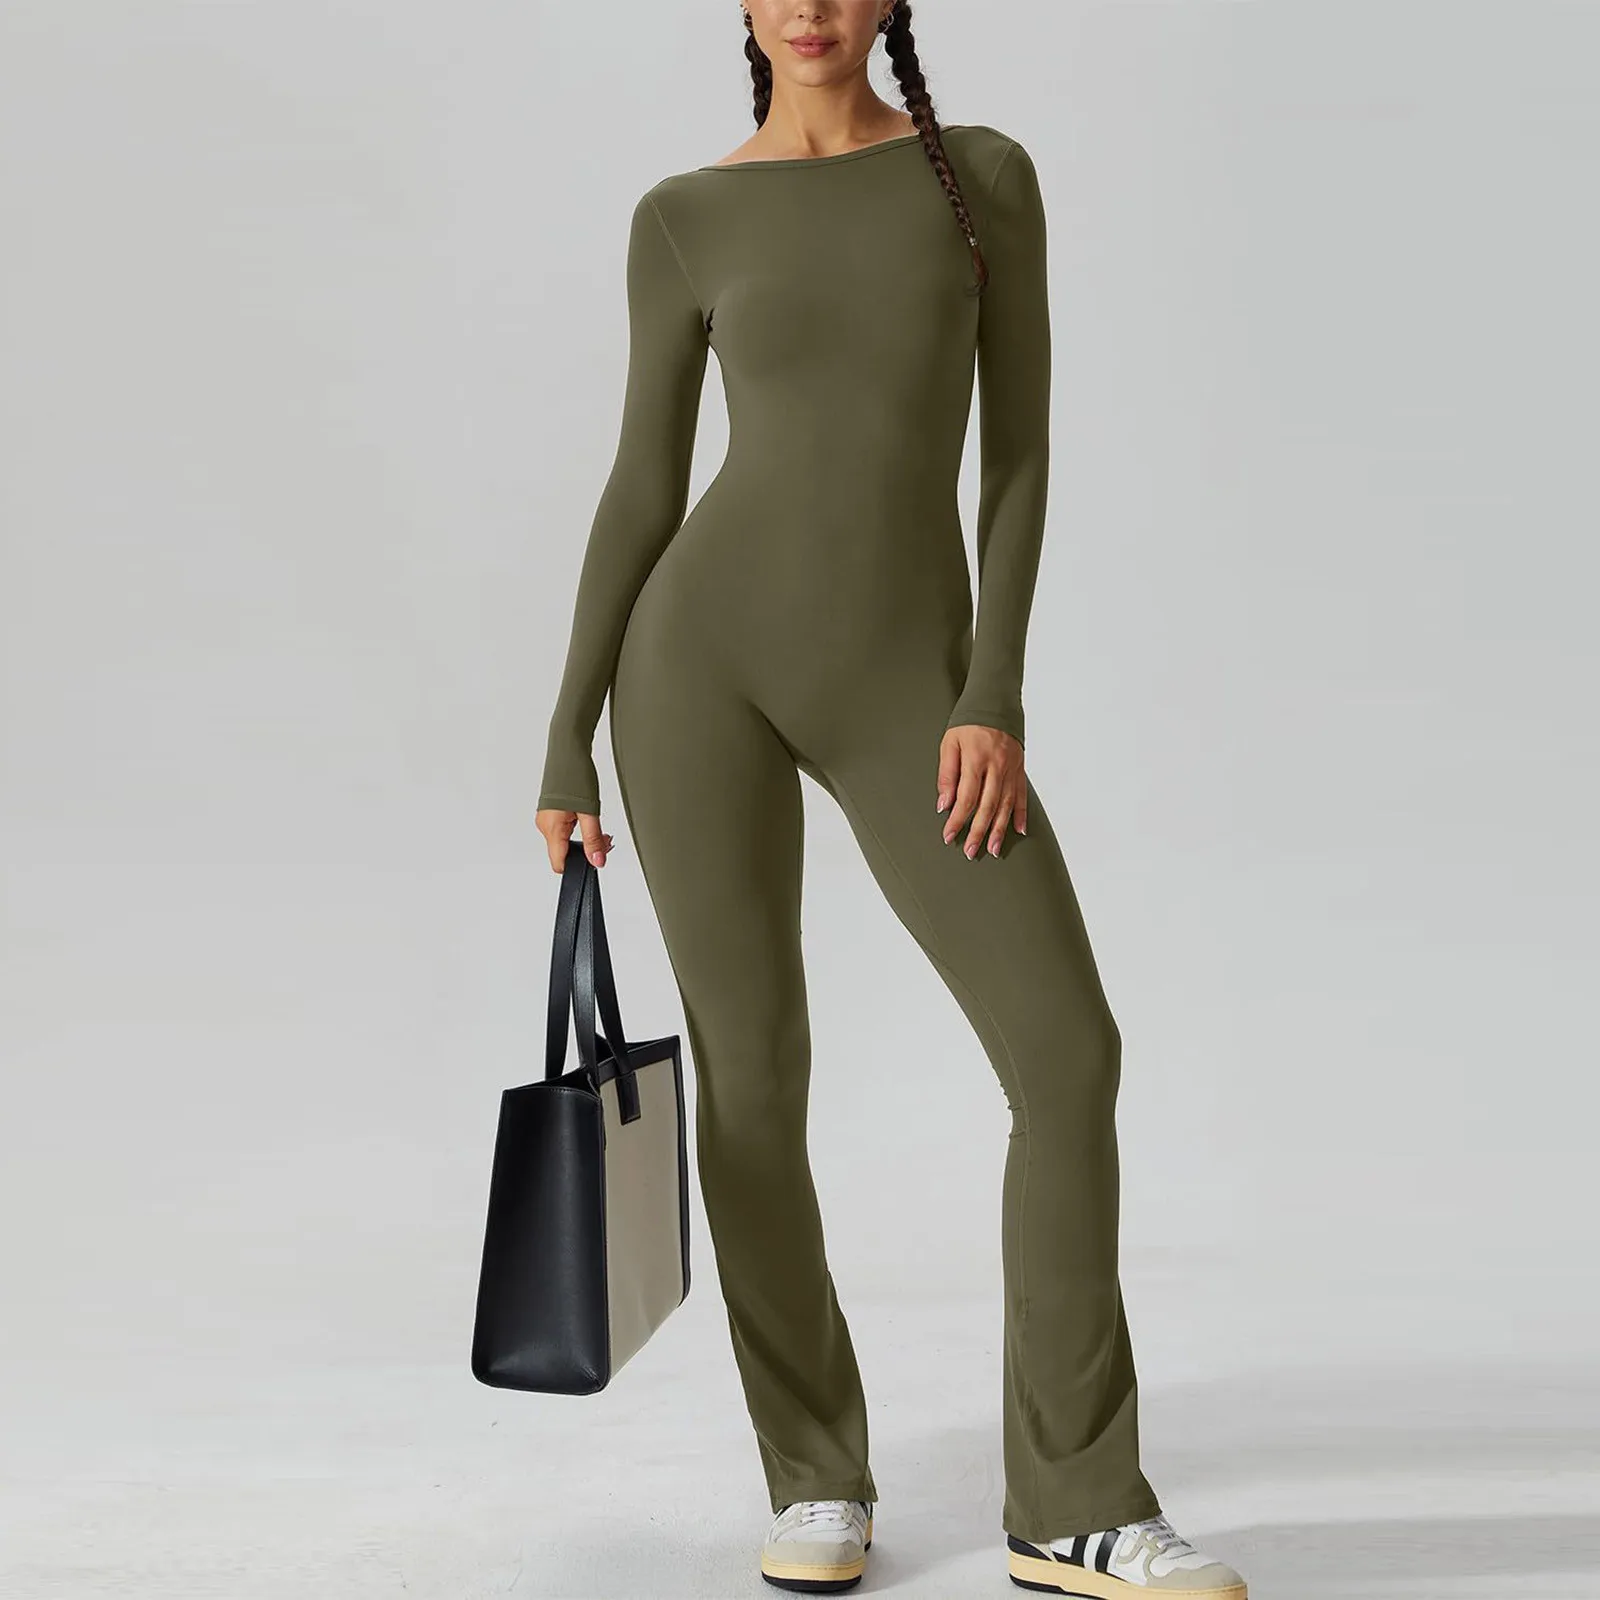 

Women Jumpsuits Sexy Bodycon Long Sleeve open back OnePiece Romper milk silk Yoga Jumpsuit Workout Unitard Playsuit Backless